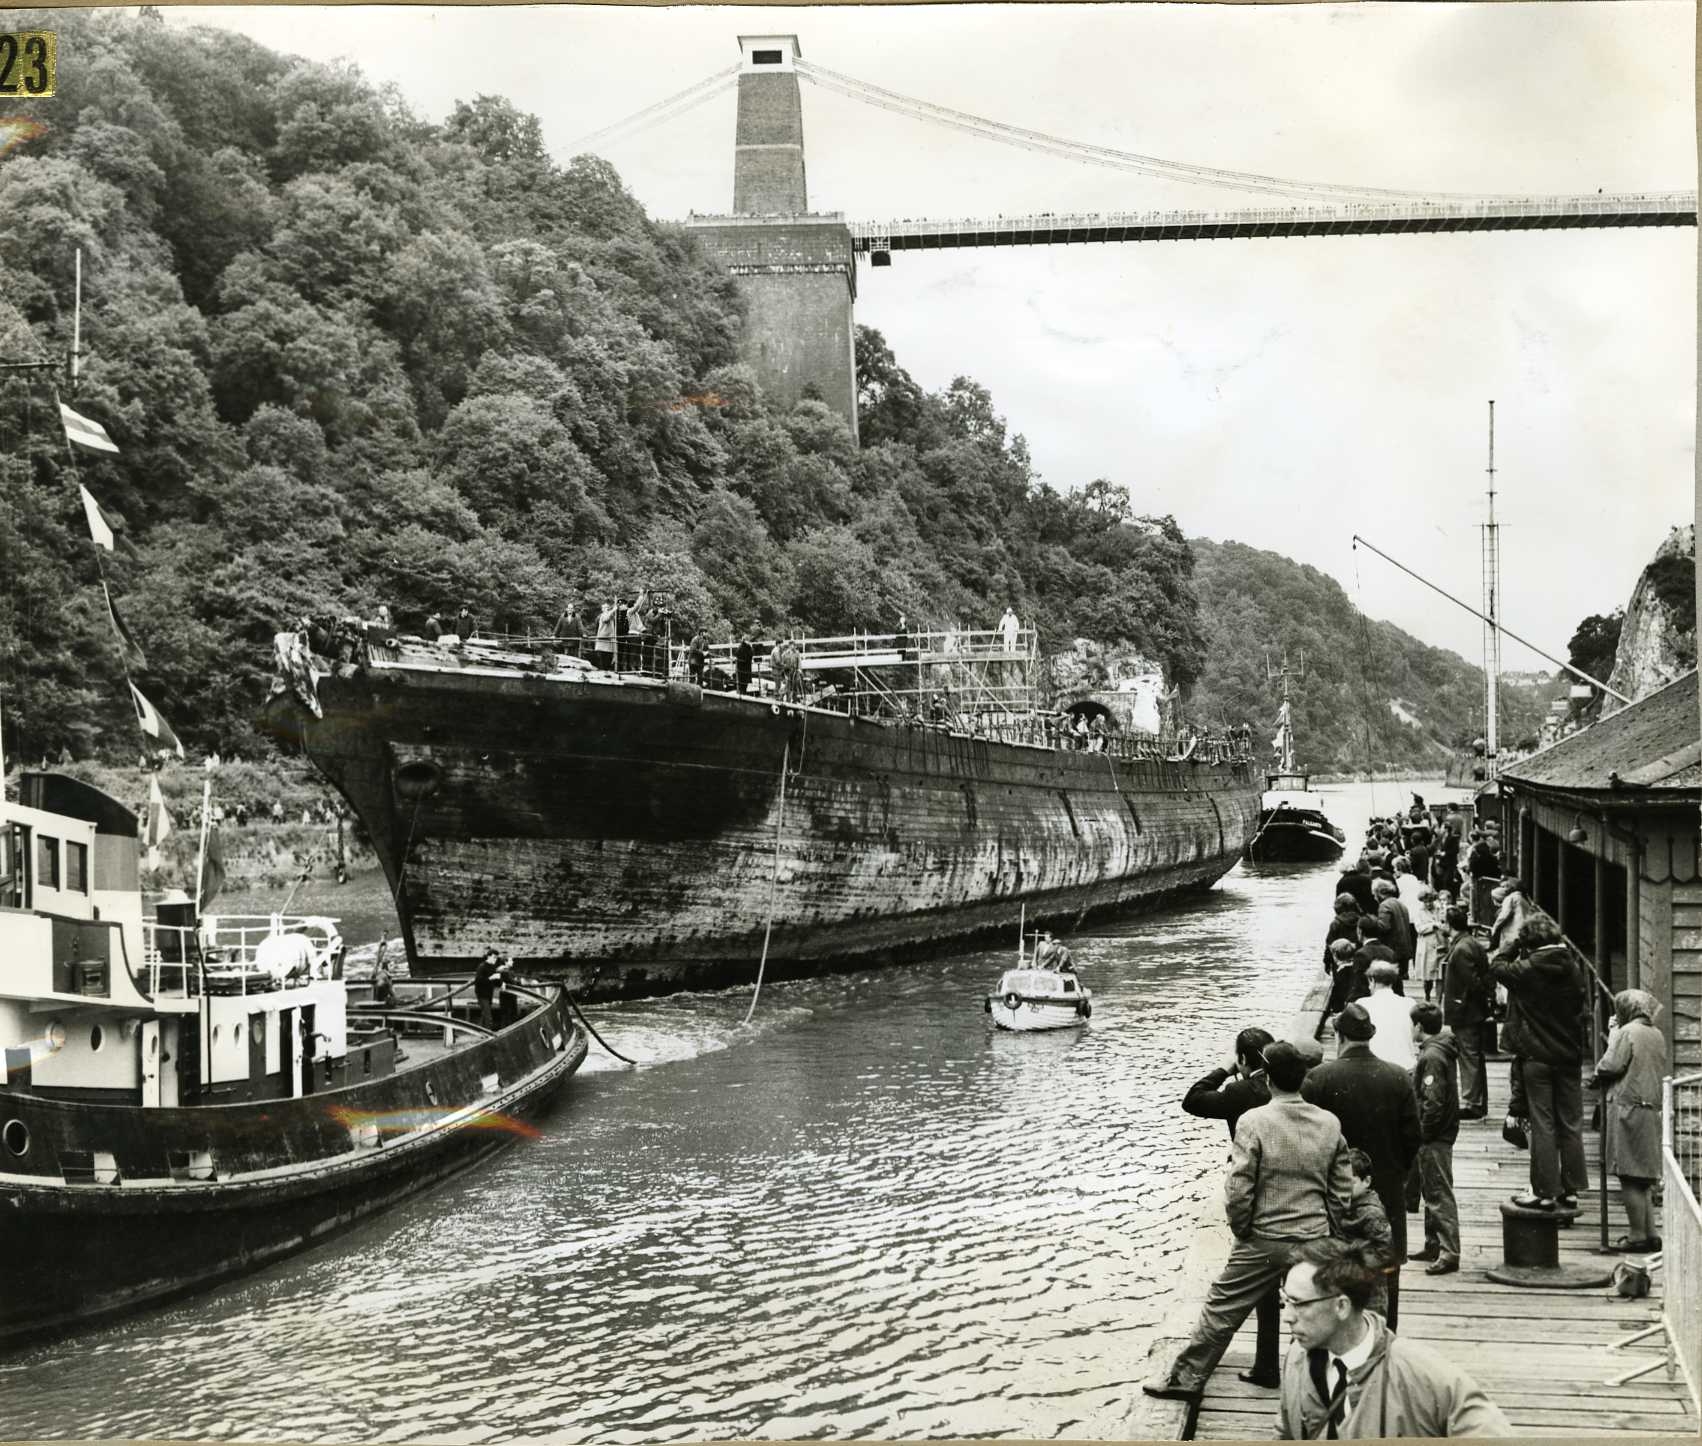 ss Great Britain being towed